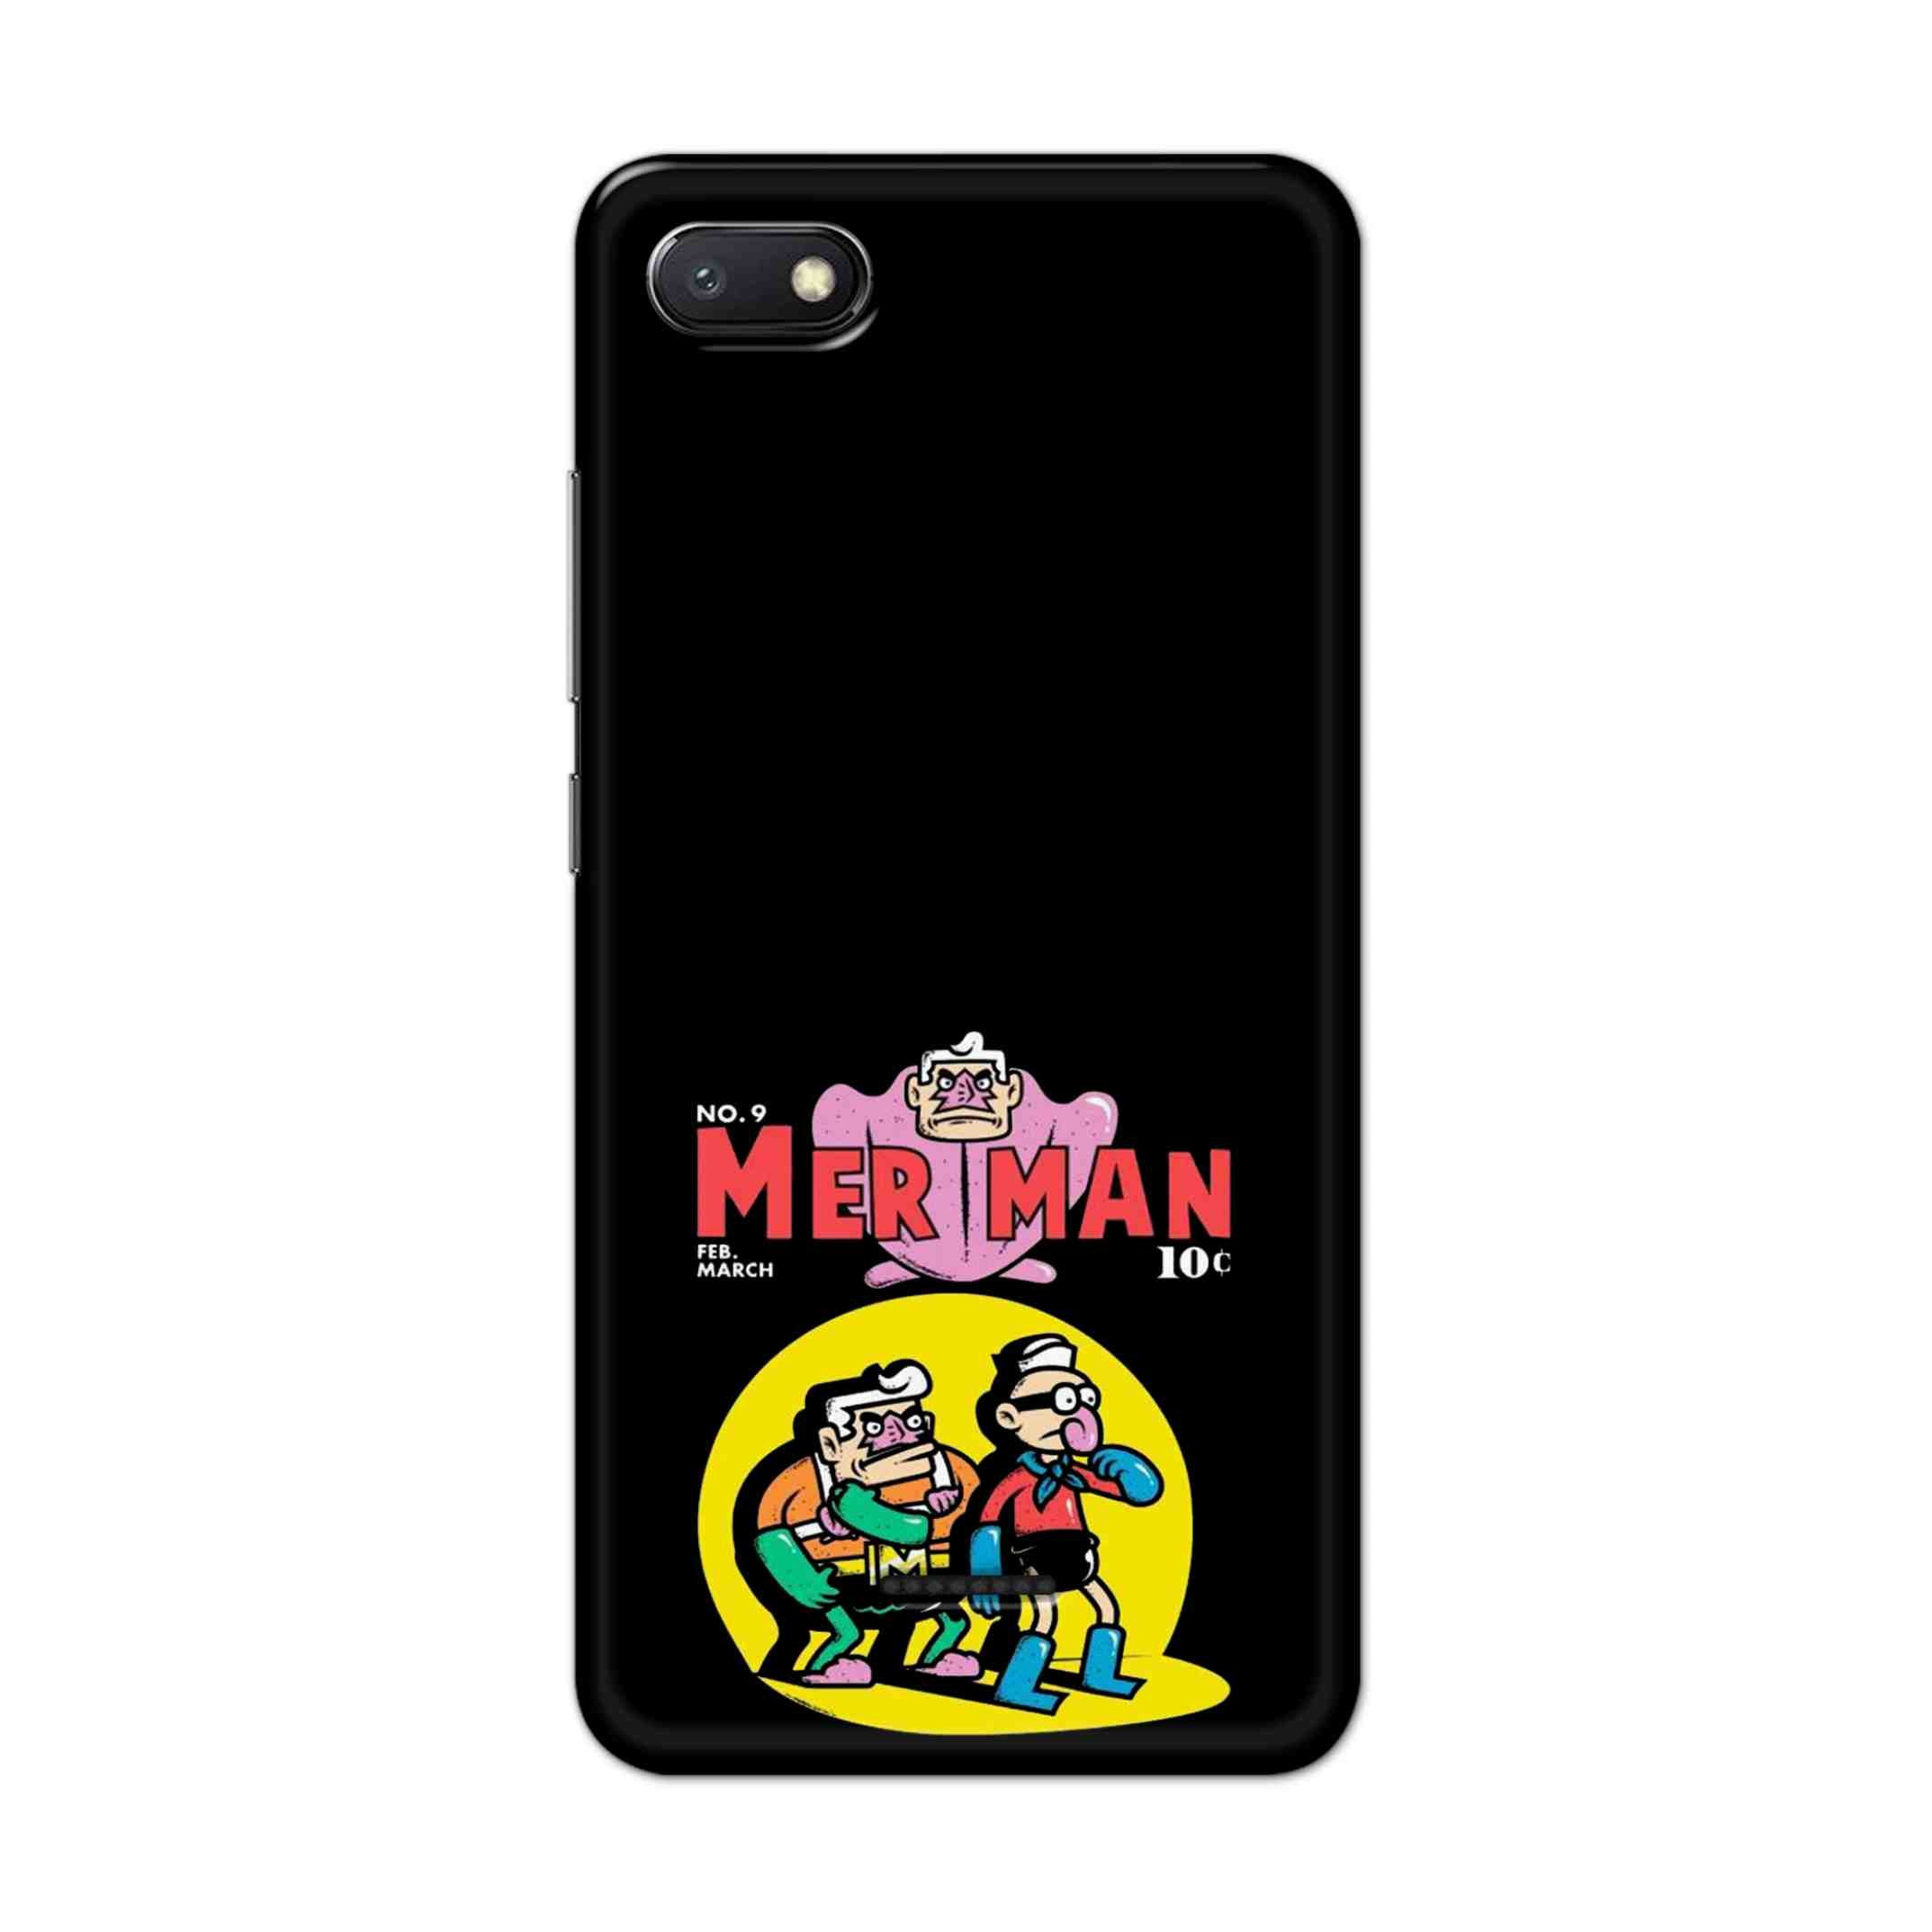 Buy Merman Hard Back Mobile Phone Case/Cover For Xiaomi Redmi 6A Online